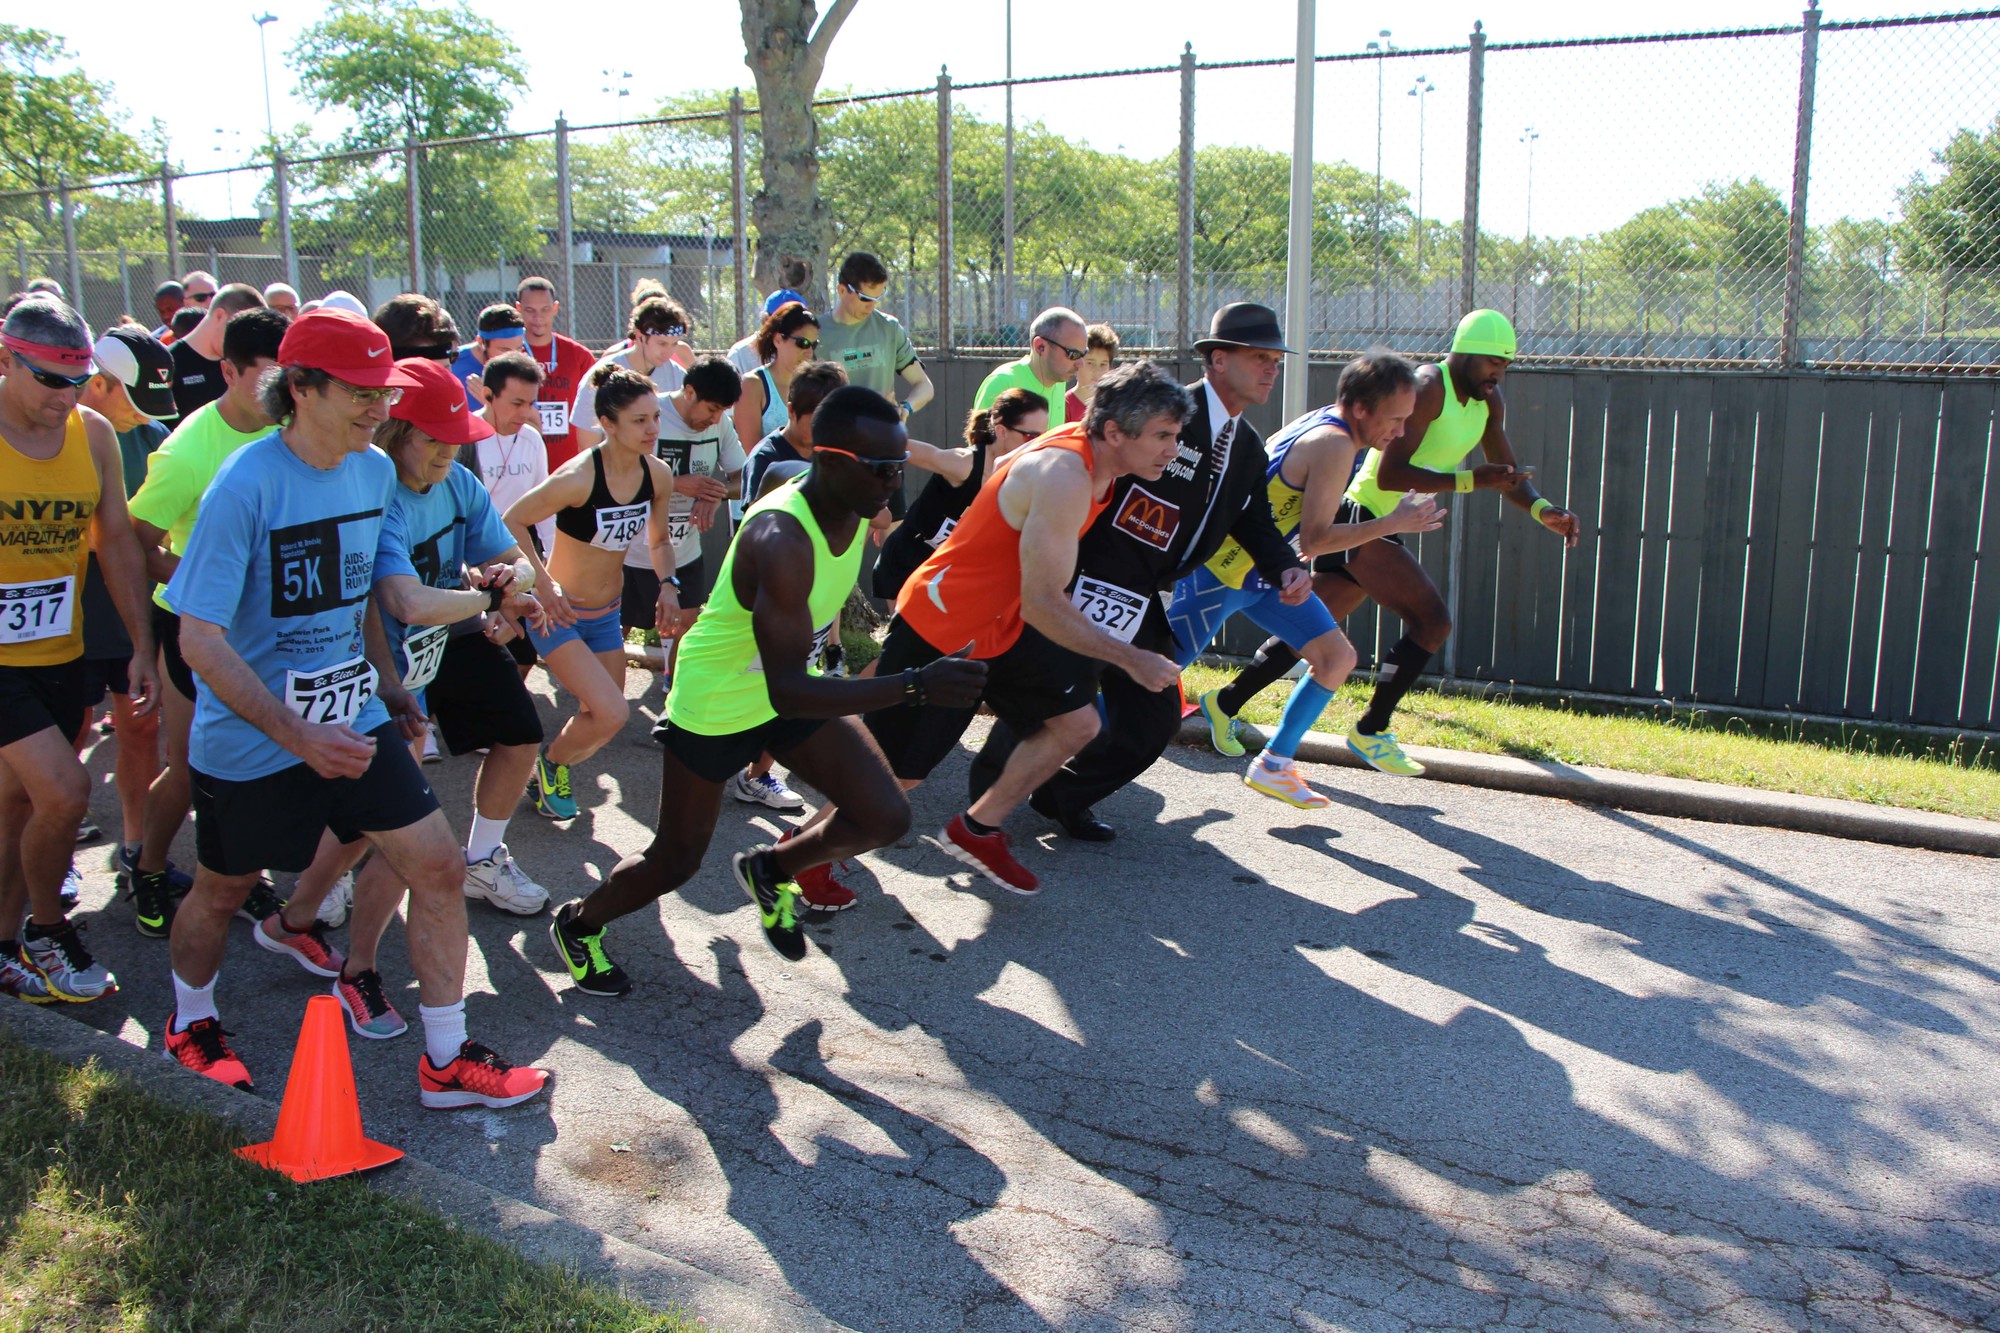 More than 200 people participated in the eighth annual 5K AIDS/Cancer Run/Walk at Baldwin Park last Sunday.